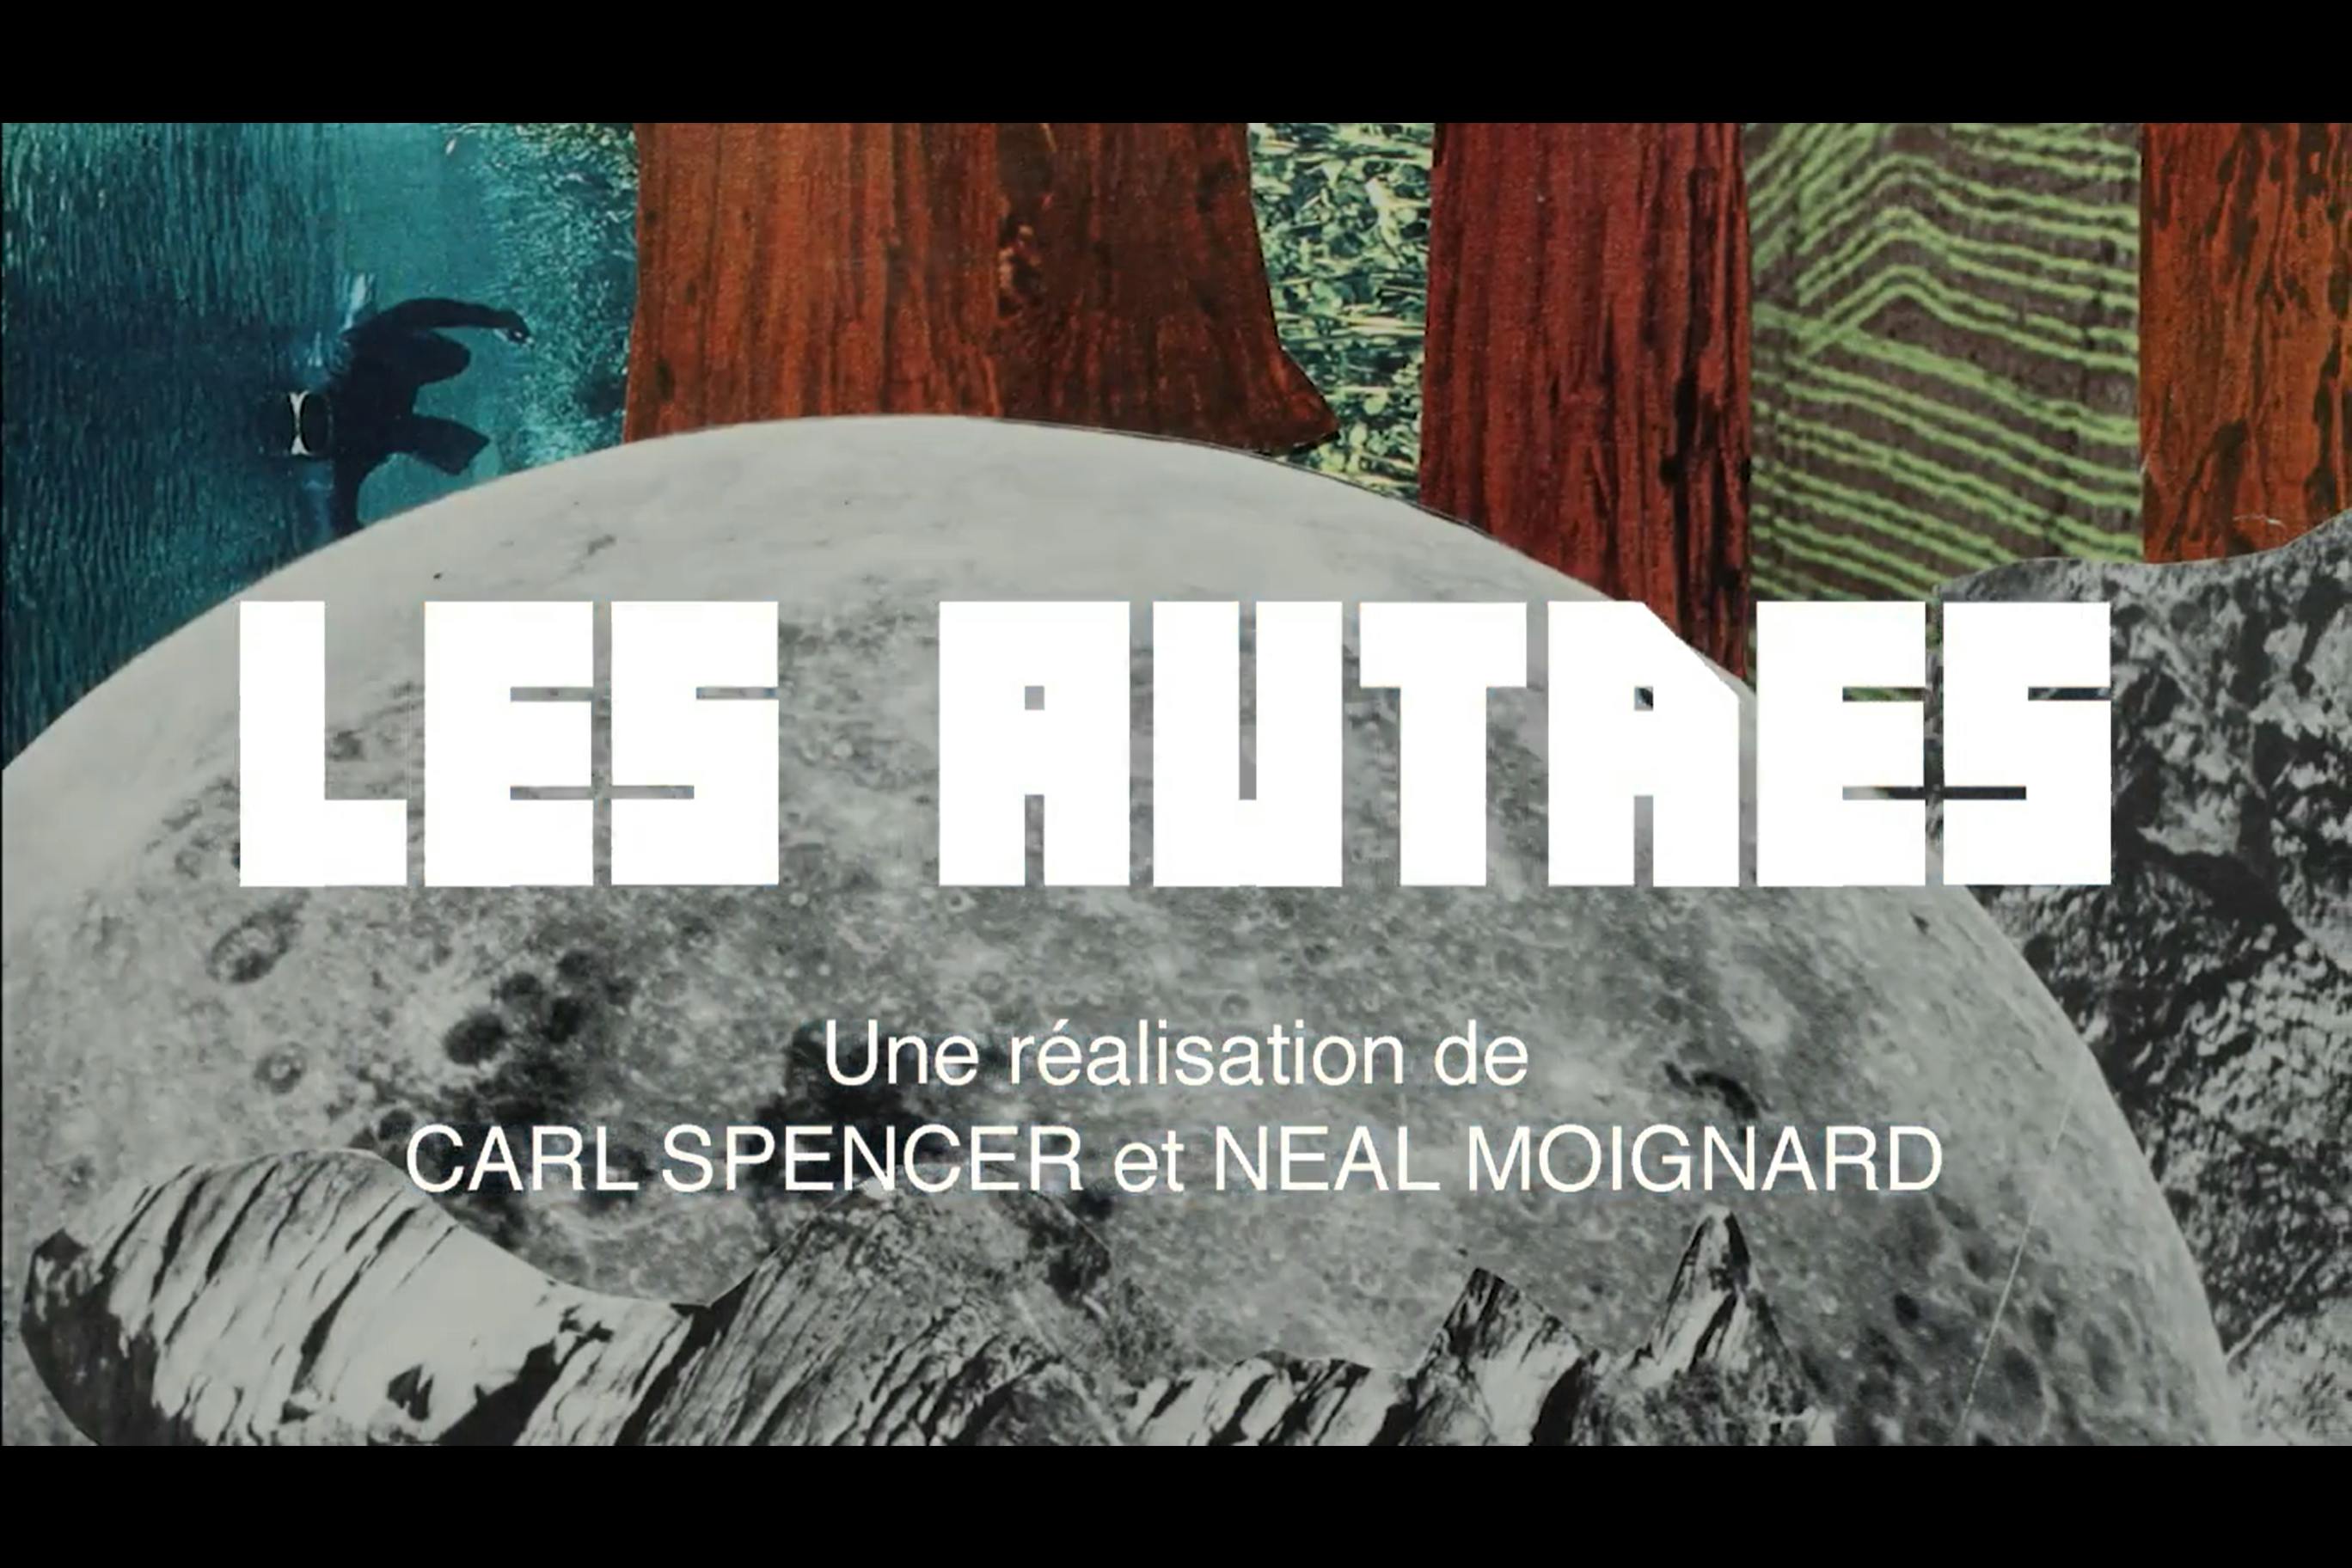 title card for "Les Autres" by Carl Spencer and Neal Moignard. 

Collage background of a moon, a river, and trees. White, bold text on it reads:

LES AUTRES
Une realisation de CARL SPENCER et NEAL MOIGNARD 